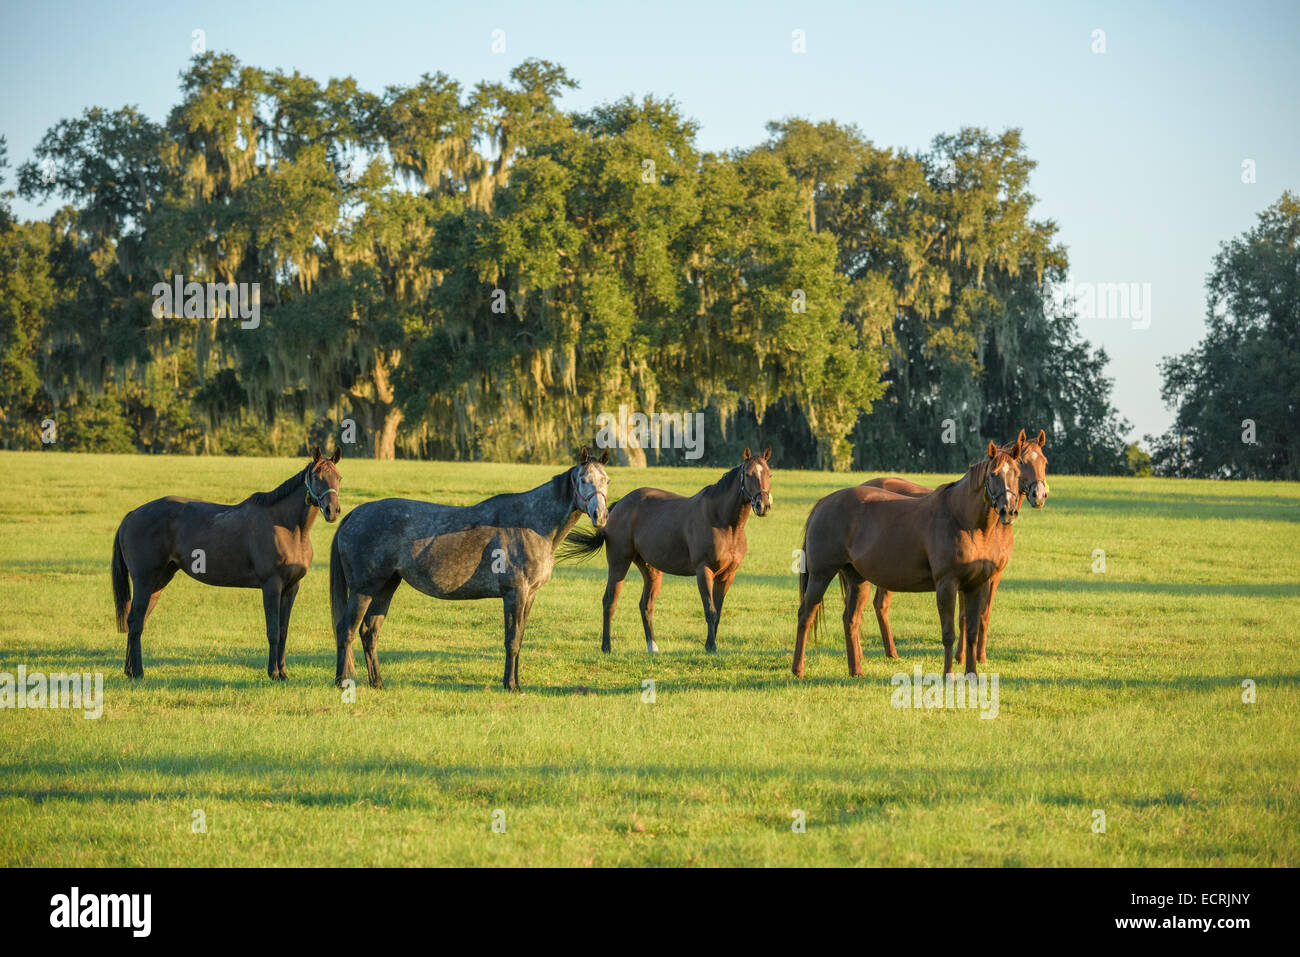 Herd of Thoroughbred horses in green pasture Stock Photo